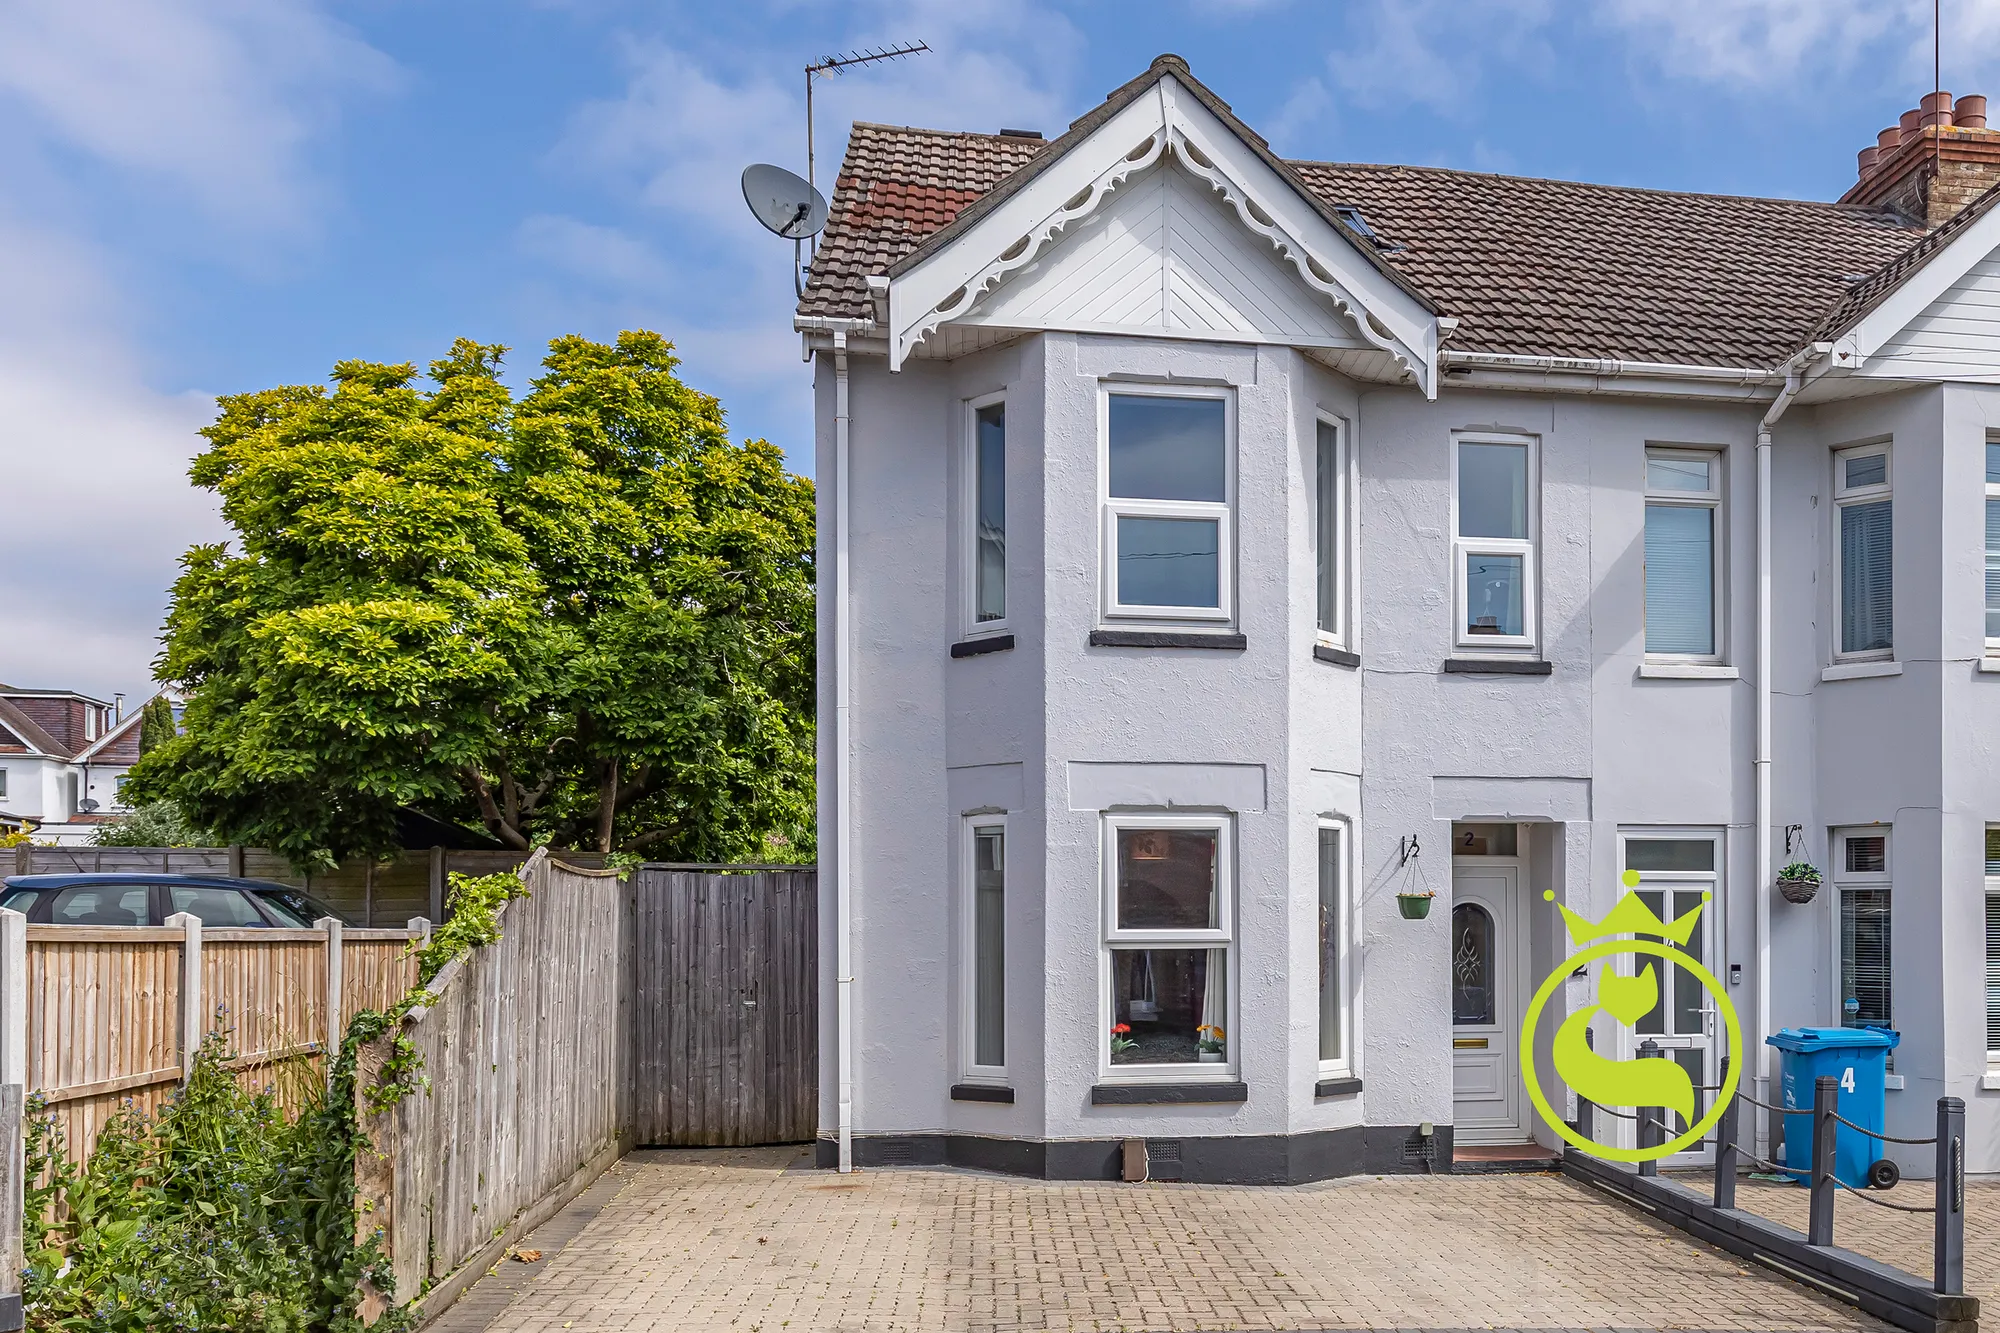 4 bed semi-detached house for sale in Courthill Road, Poole - Property Image 1